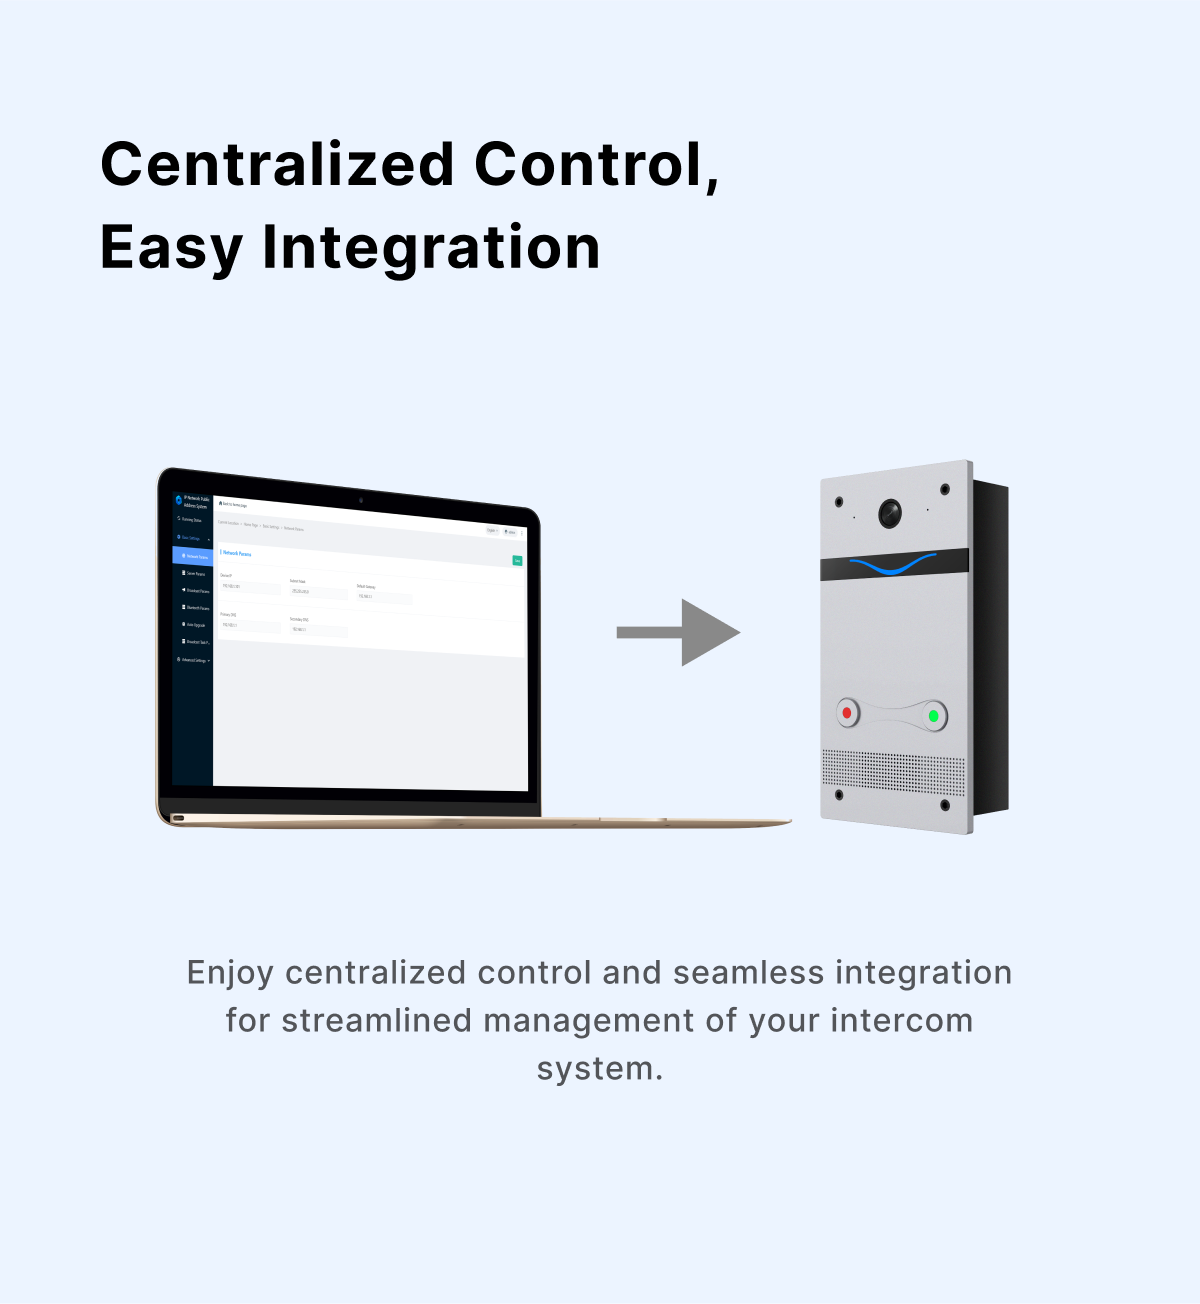 Centralized Management Independent Control Hands free Indoor Video Intercom for Intercom System, enjoy centralized control and seamless integration for streamlined management of your intercom system